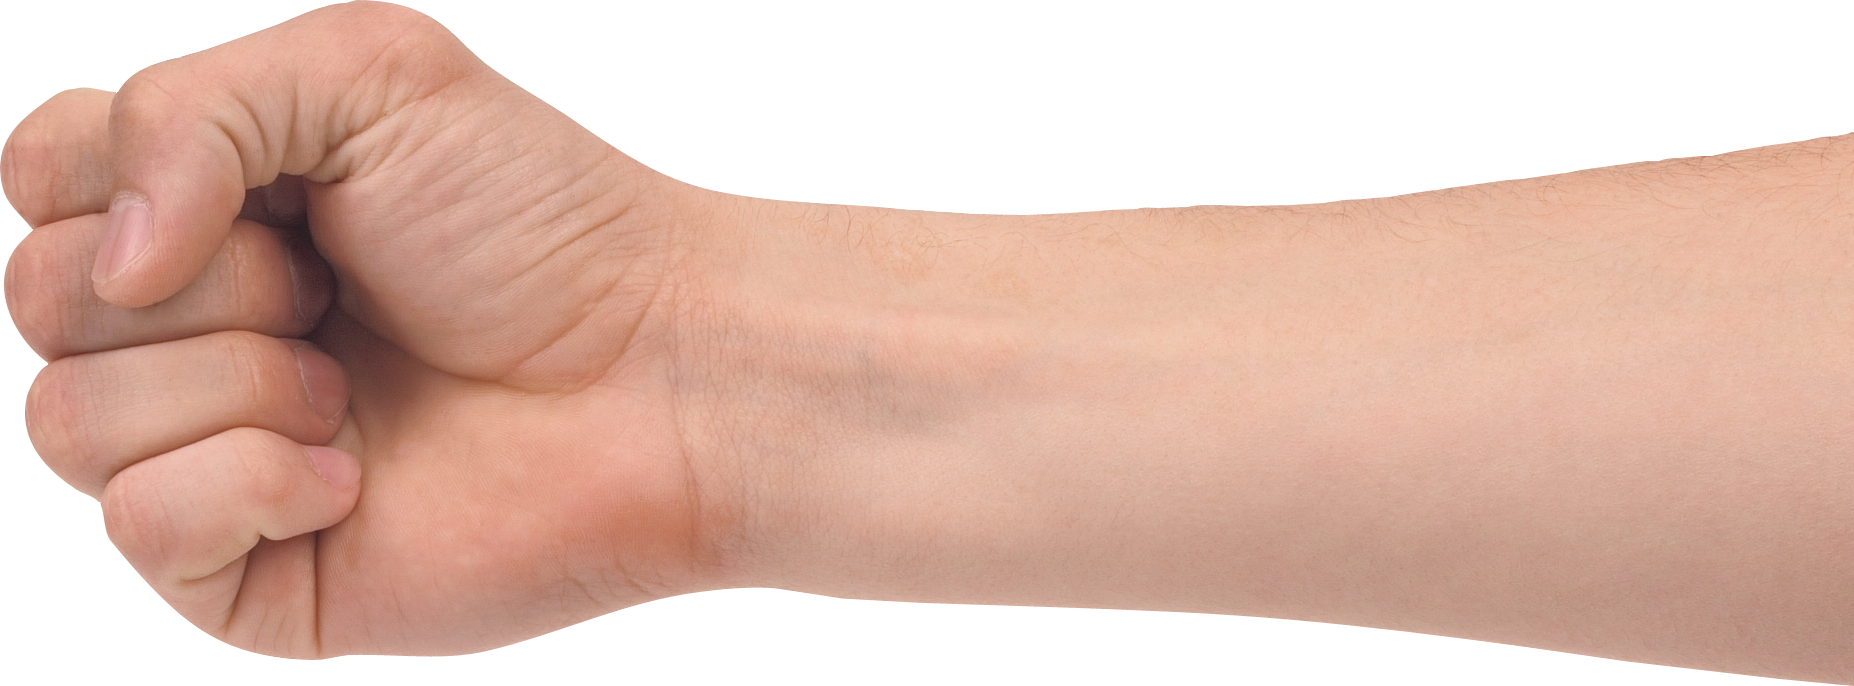 Png image purepng free. Hands clipart forearm